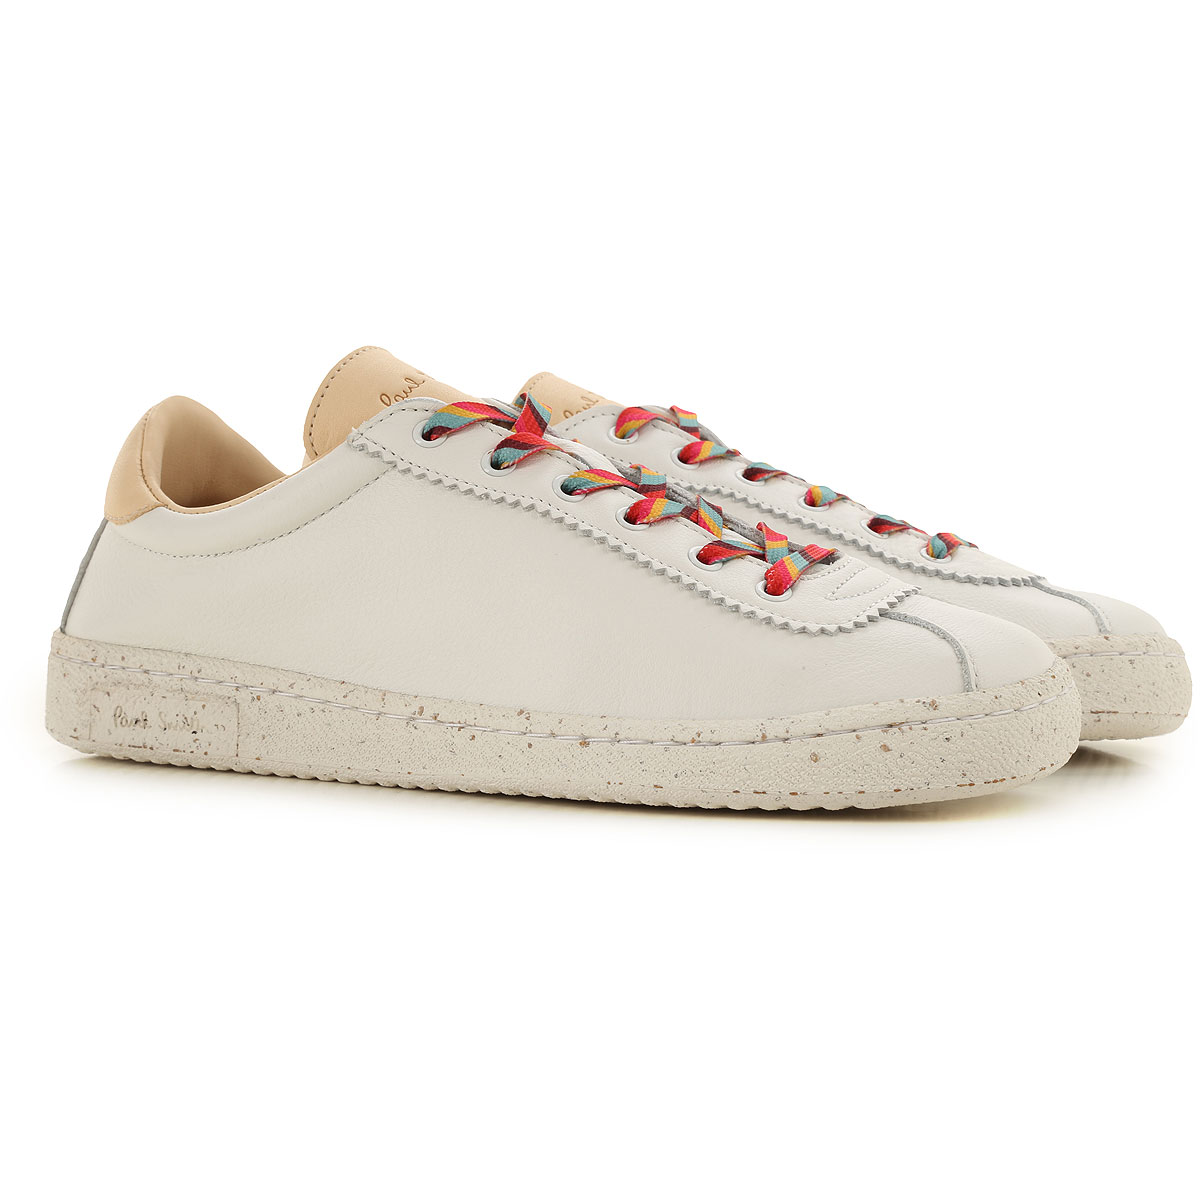 Womens Shoes Paul Smith, Style code: w1s-dus03-aset